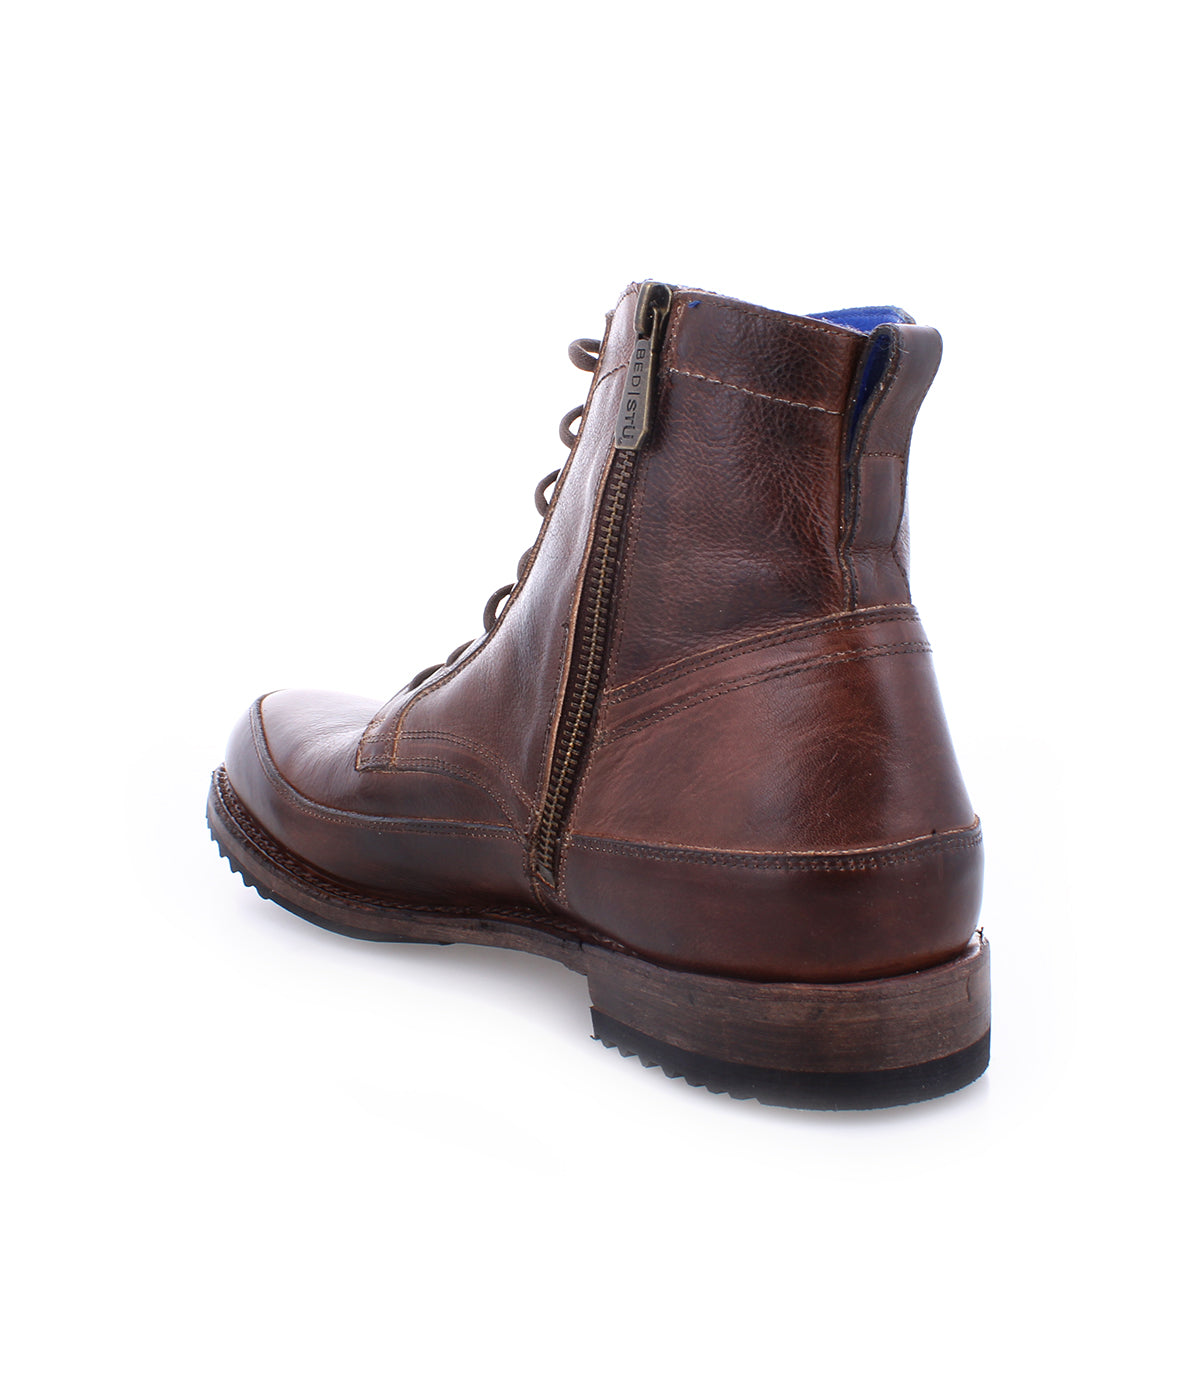 Side view of a Bed Stu Spiker brown leather lace-up ankle boot with a zipper, isolated on a white background.